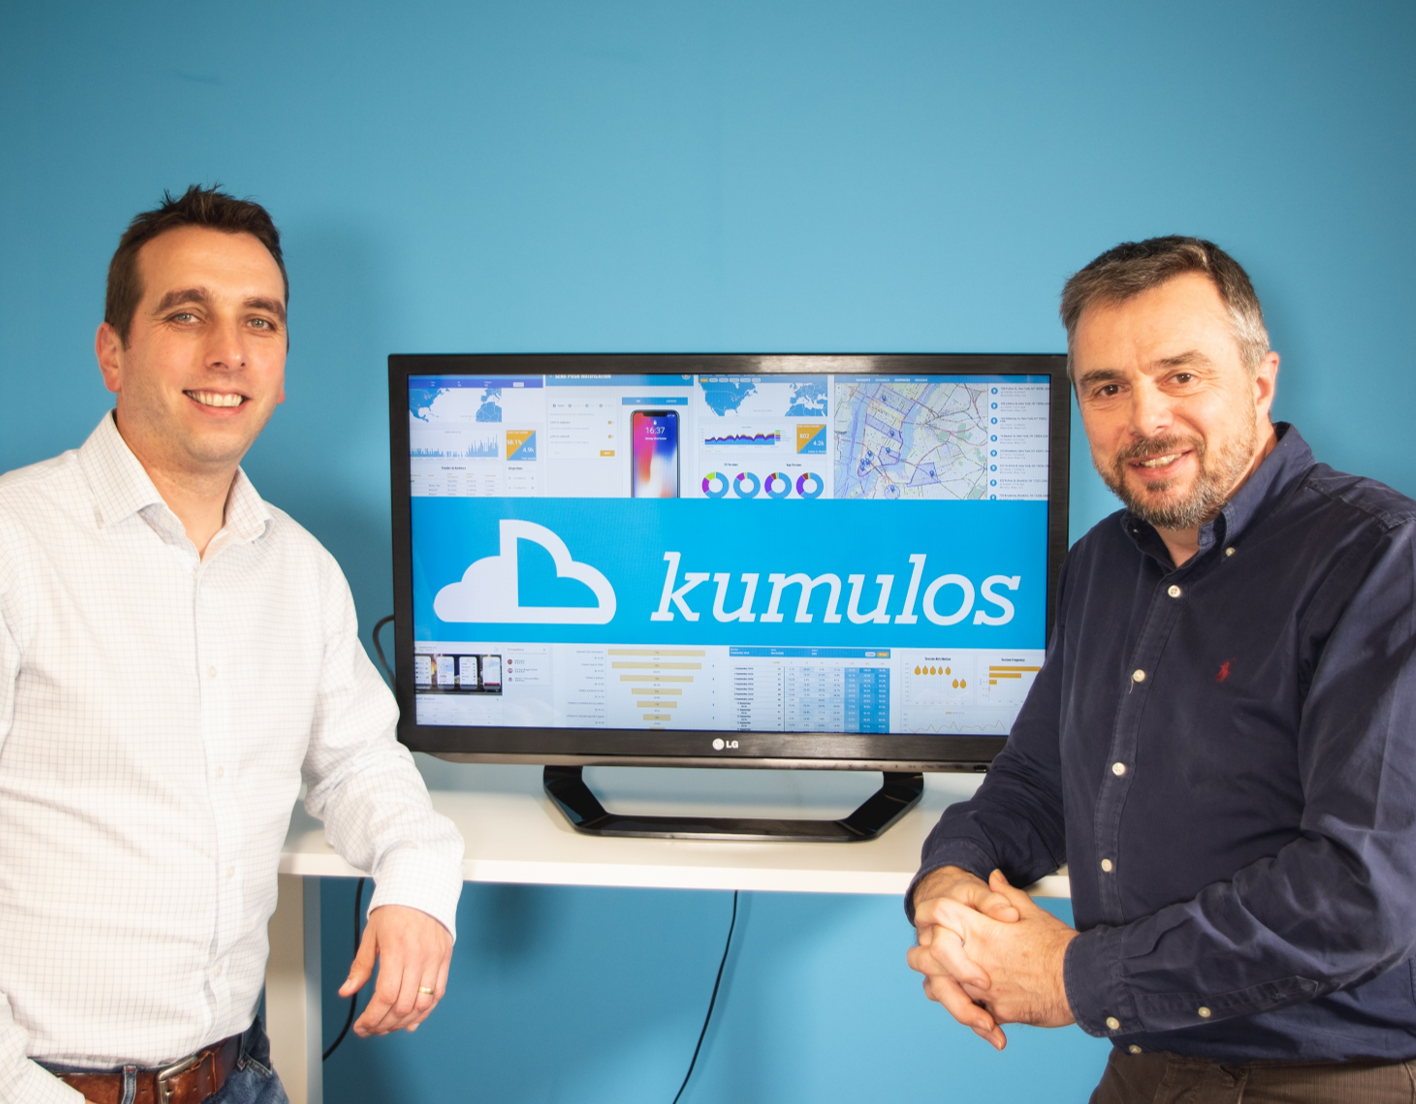 App platform all set for growth with £750k investment